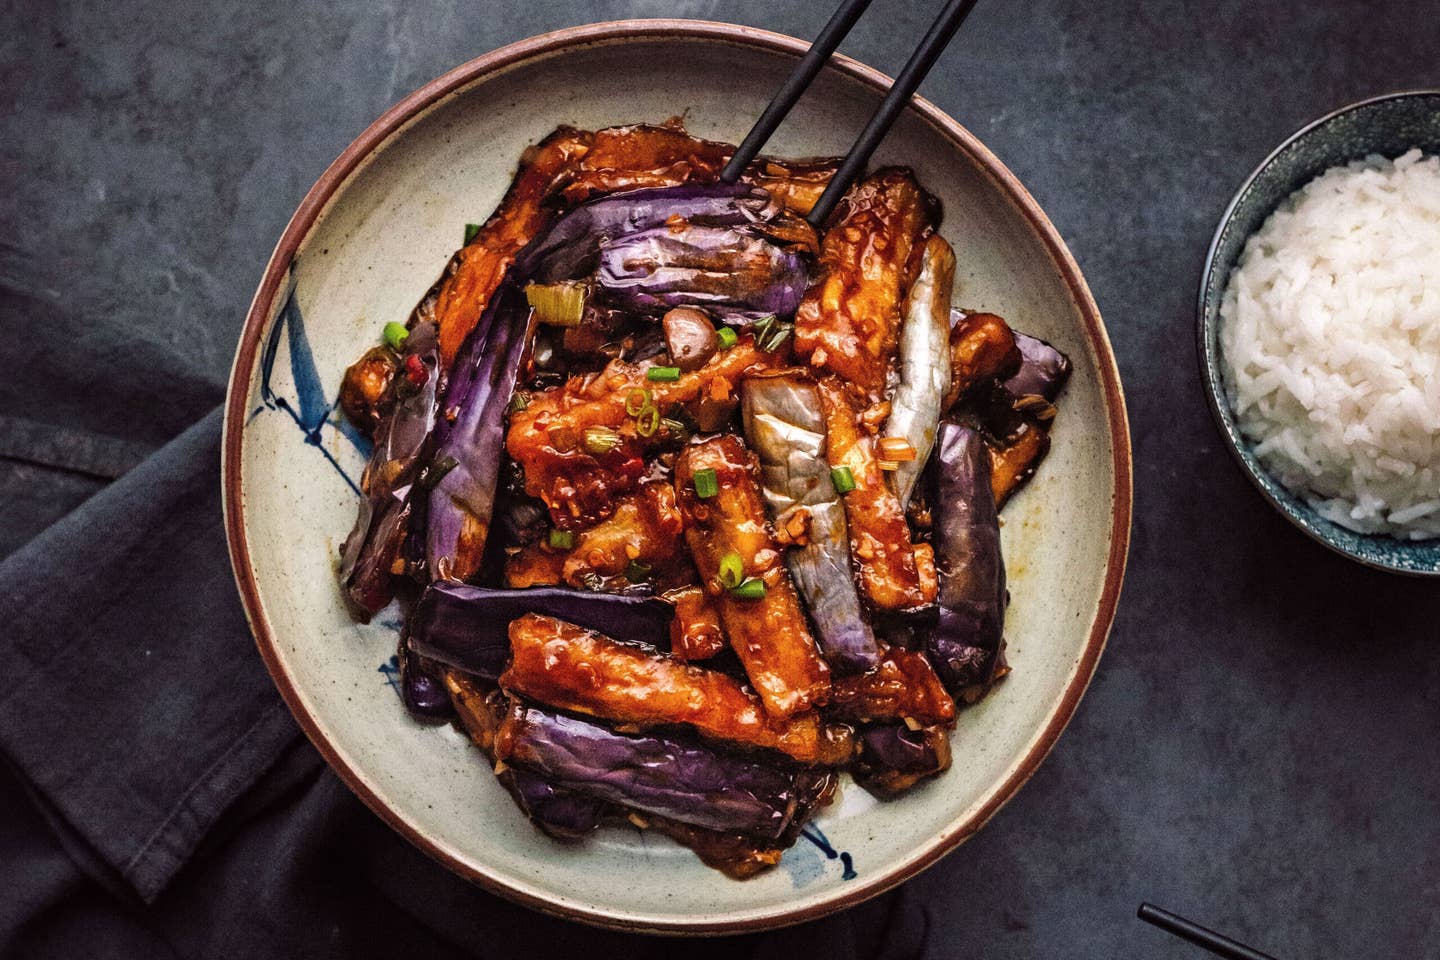 Chinese Vegan Cooking Has Been Perfected Over Millenia (And You Can Taste It)